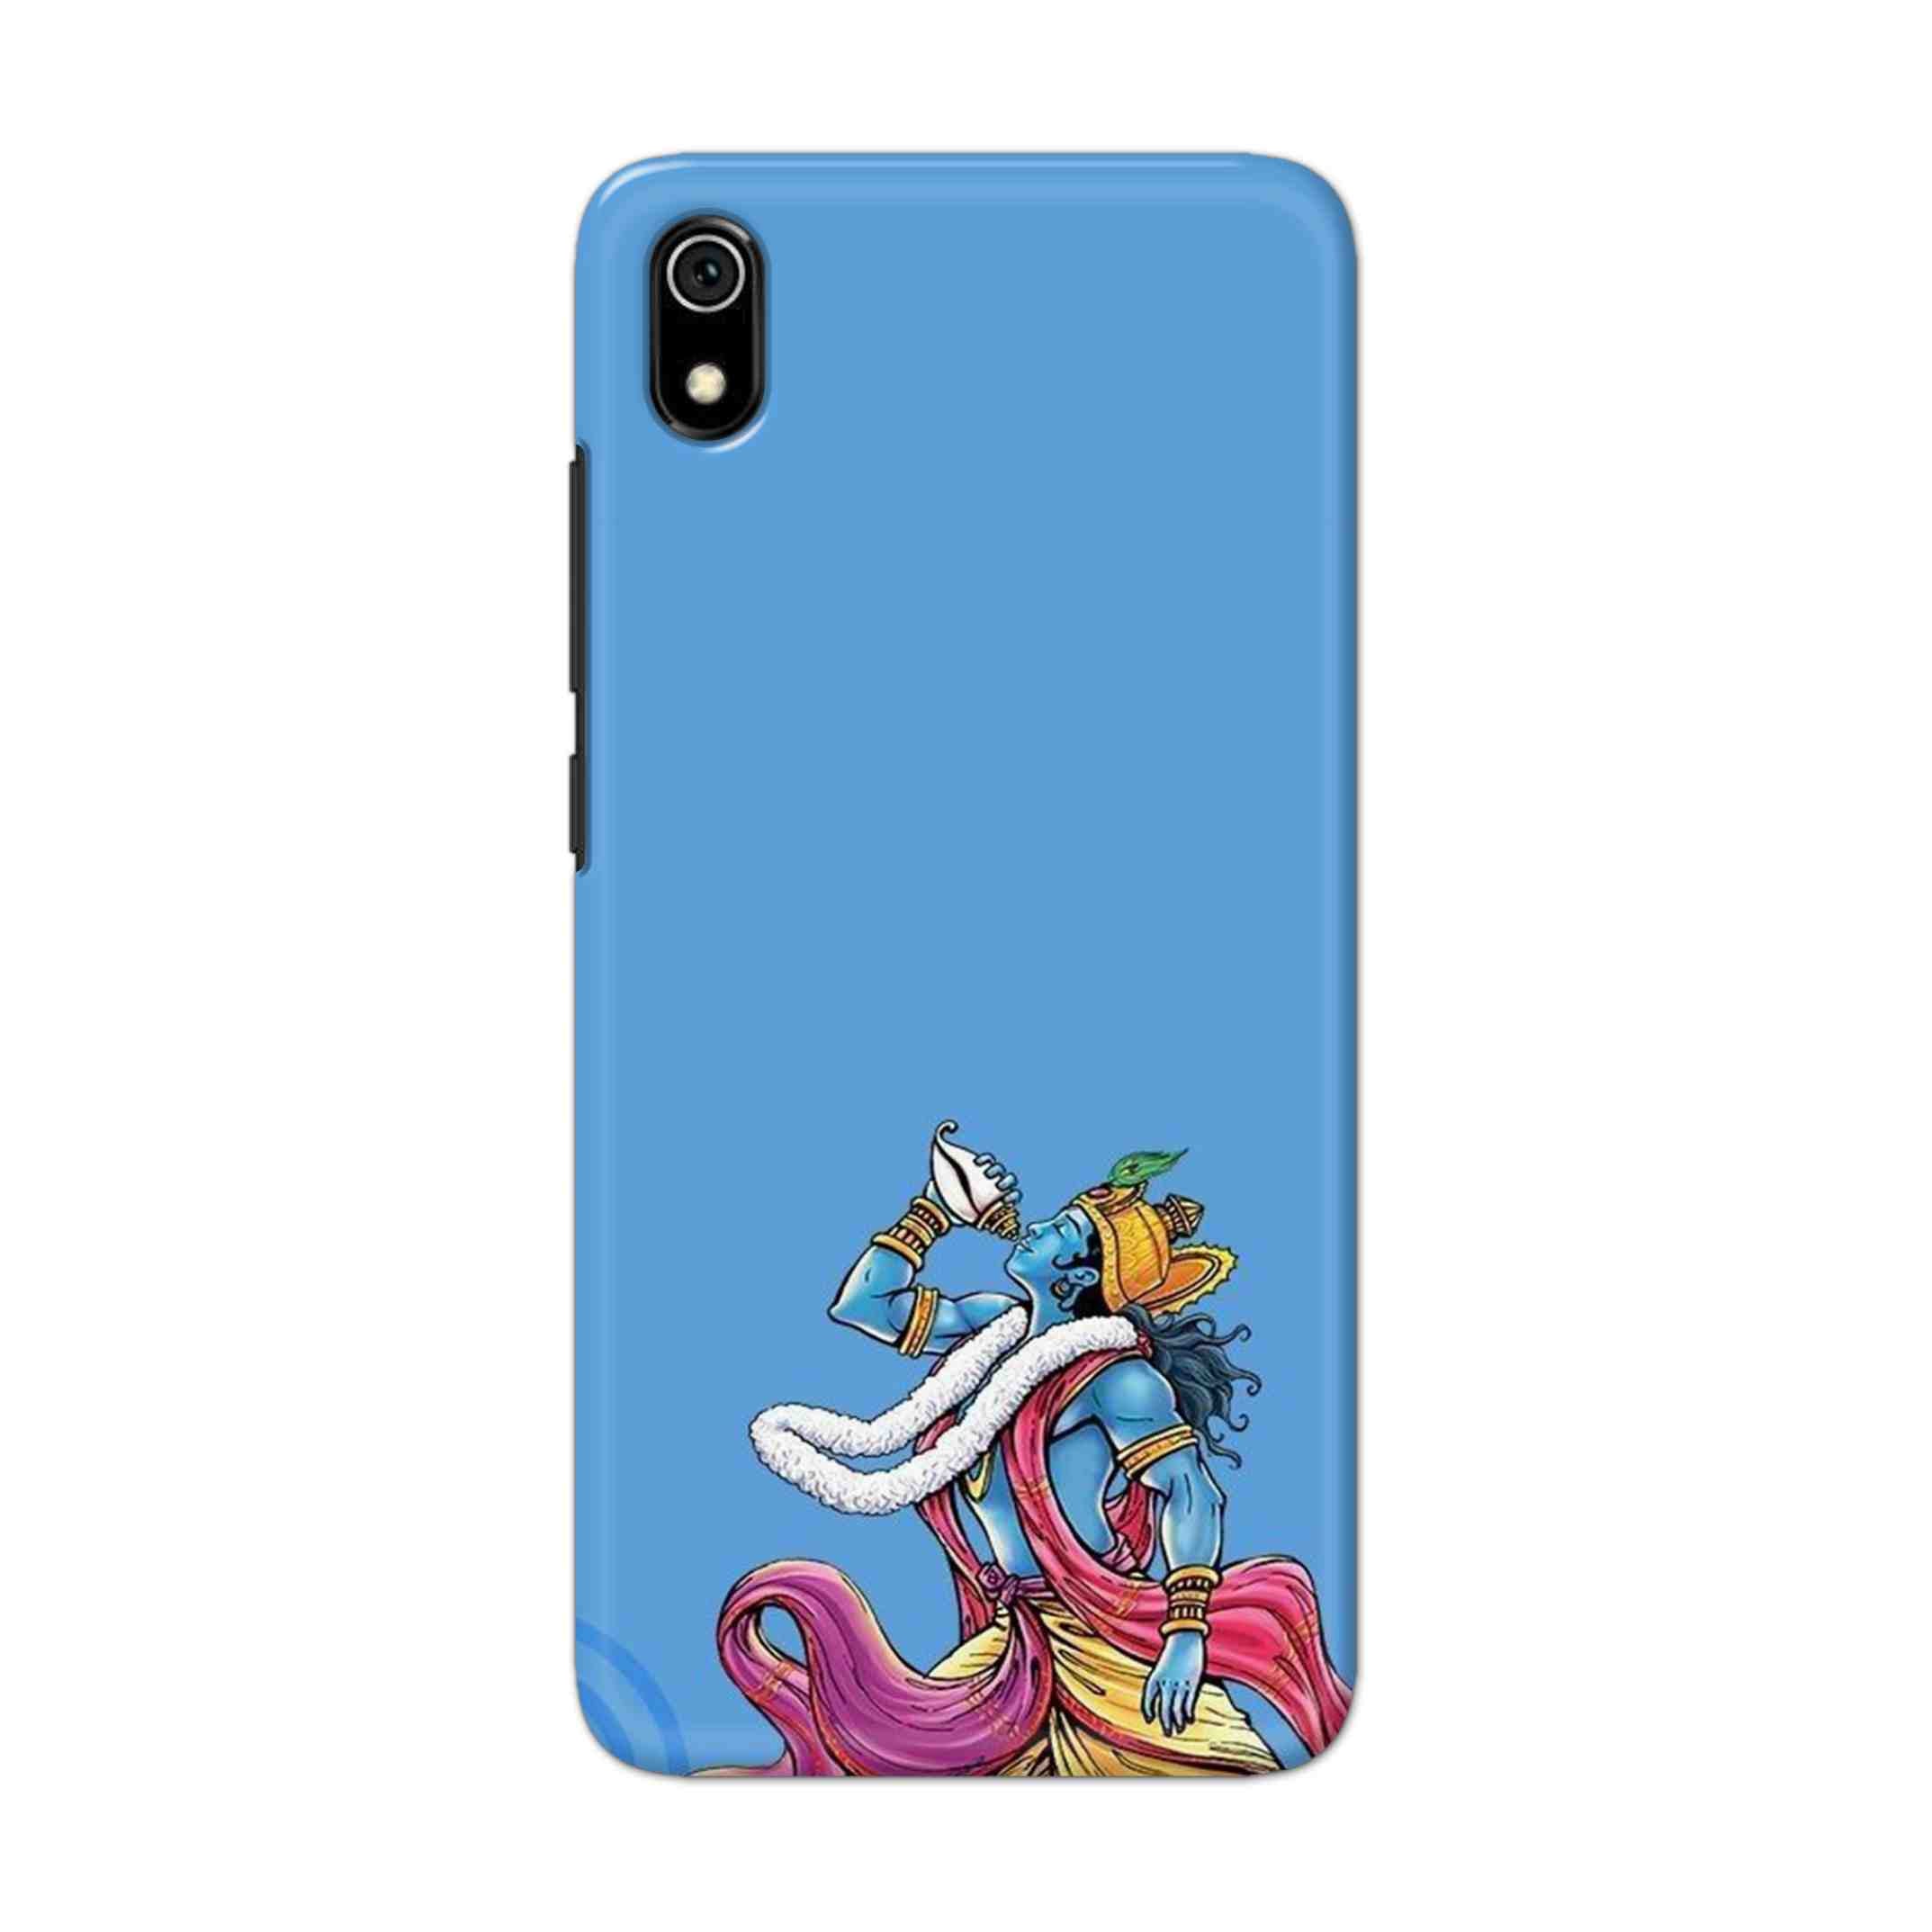 Buy Krishna Hard Back Mobile Phone Case Cover For Xiaomi Redmi 7A Online